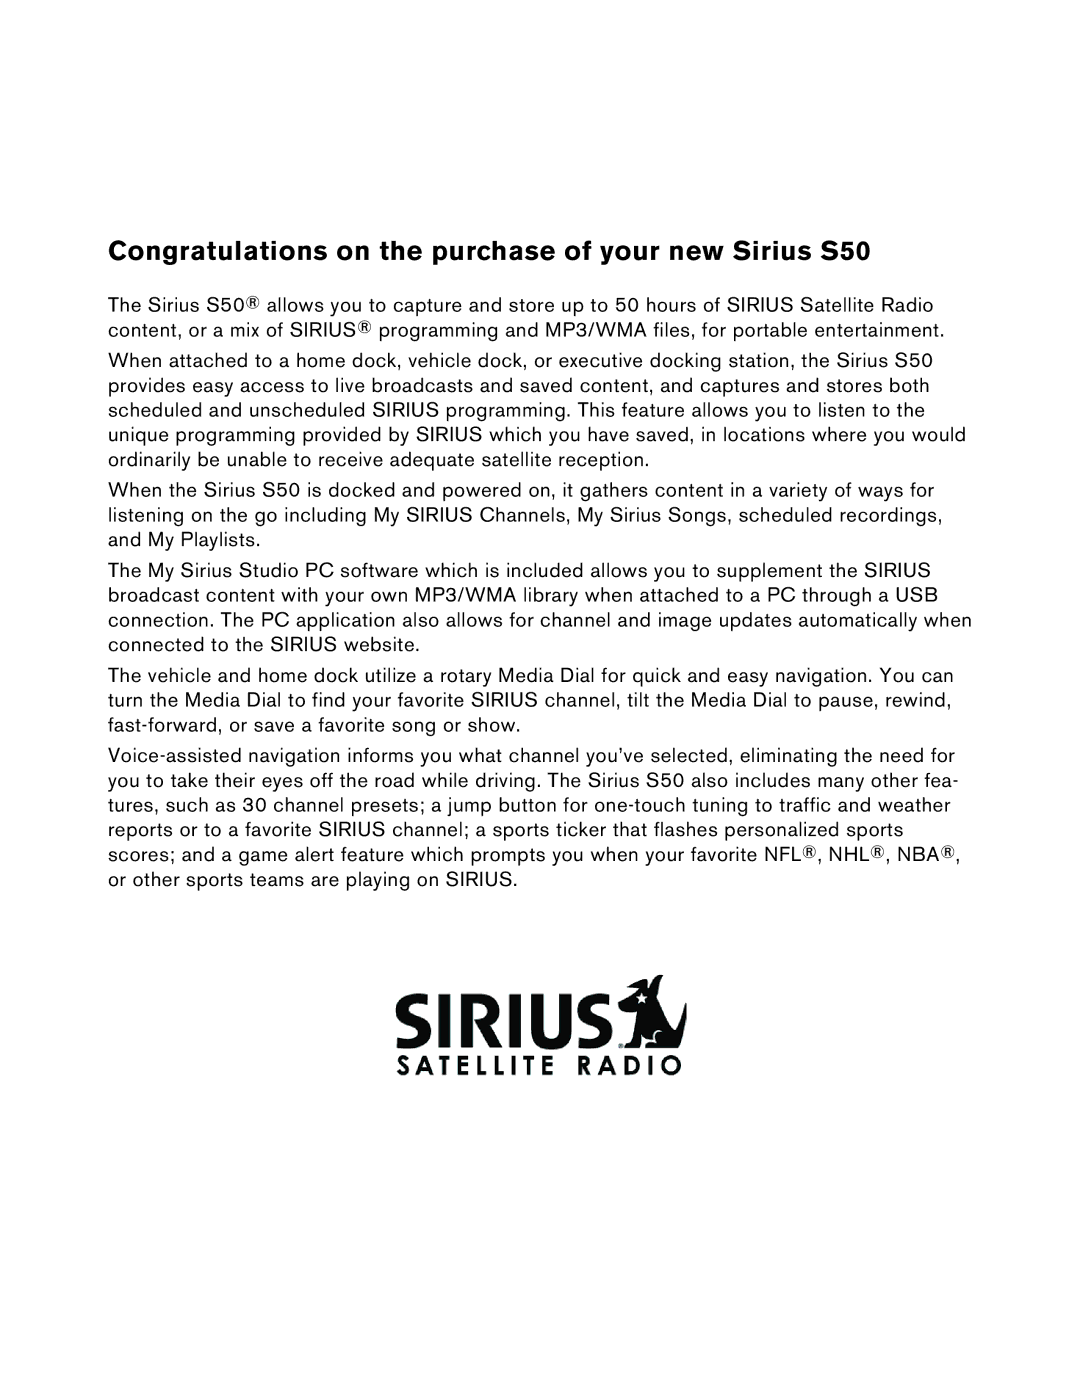 Sirius Satellite Radio user manual Congratulations on the purchase of your new Sirius S50 